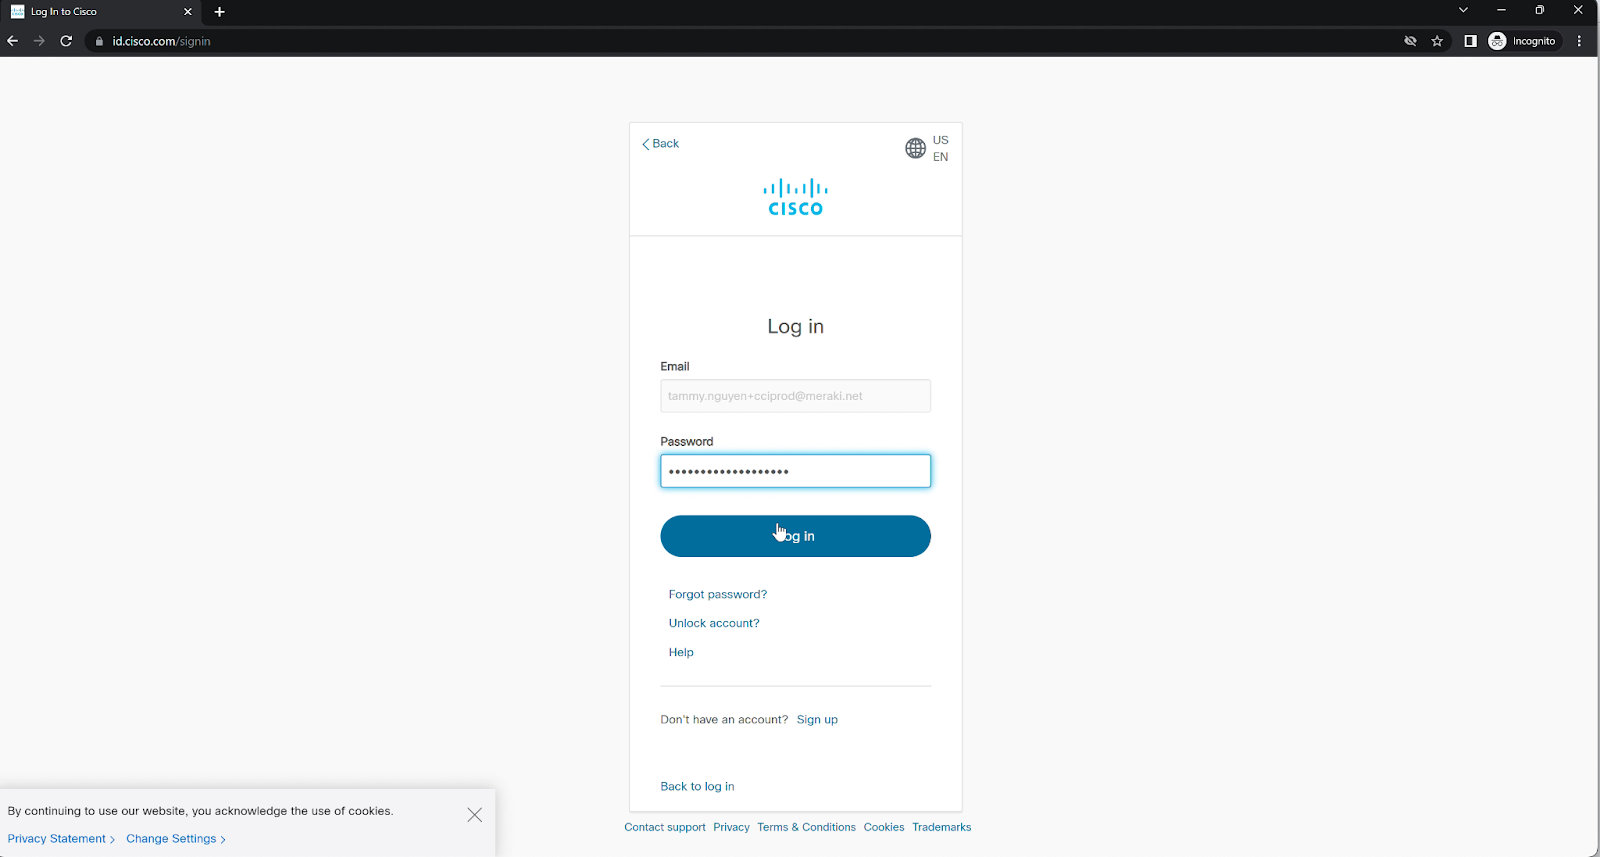 User gets redirected to Cisco login page for Authentication